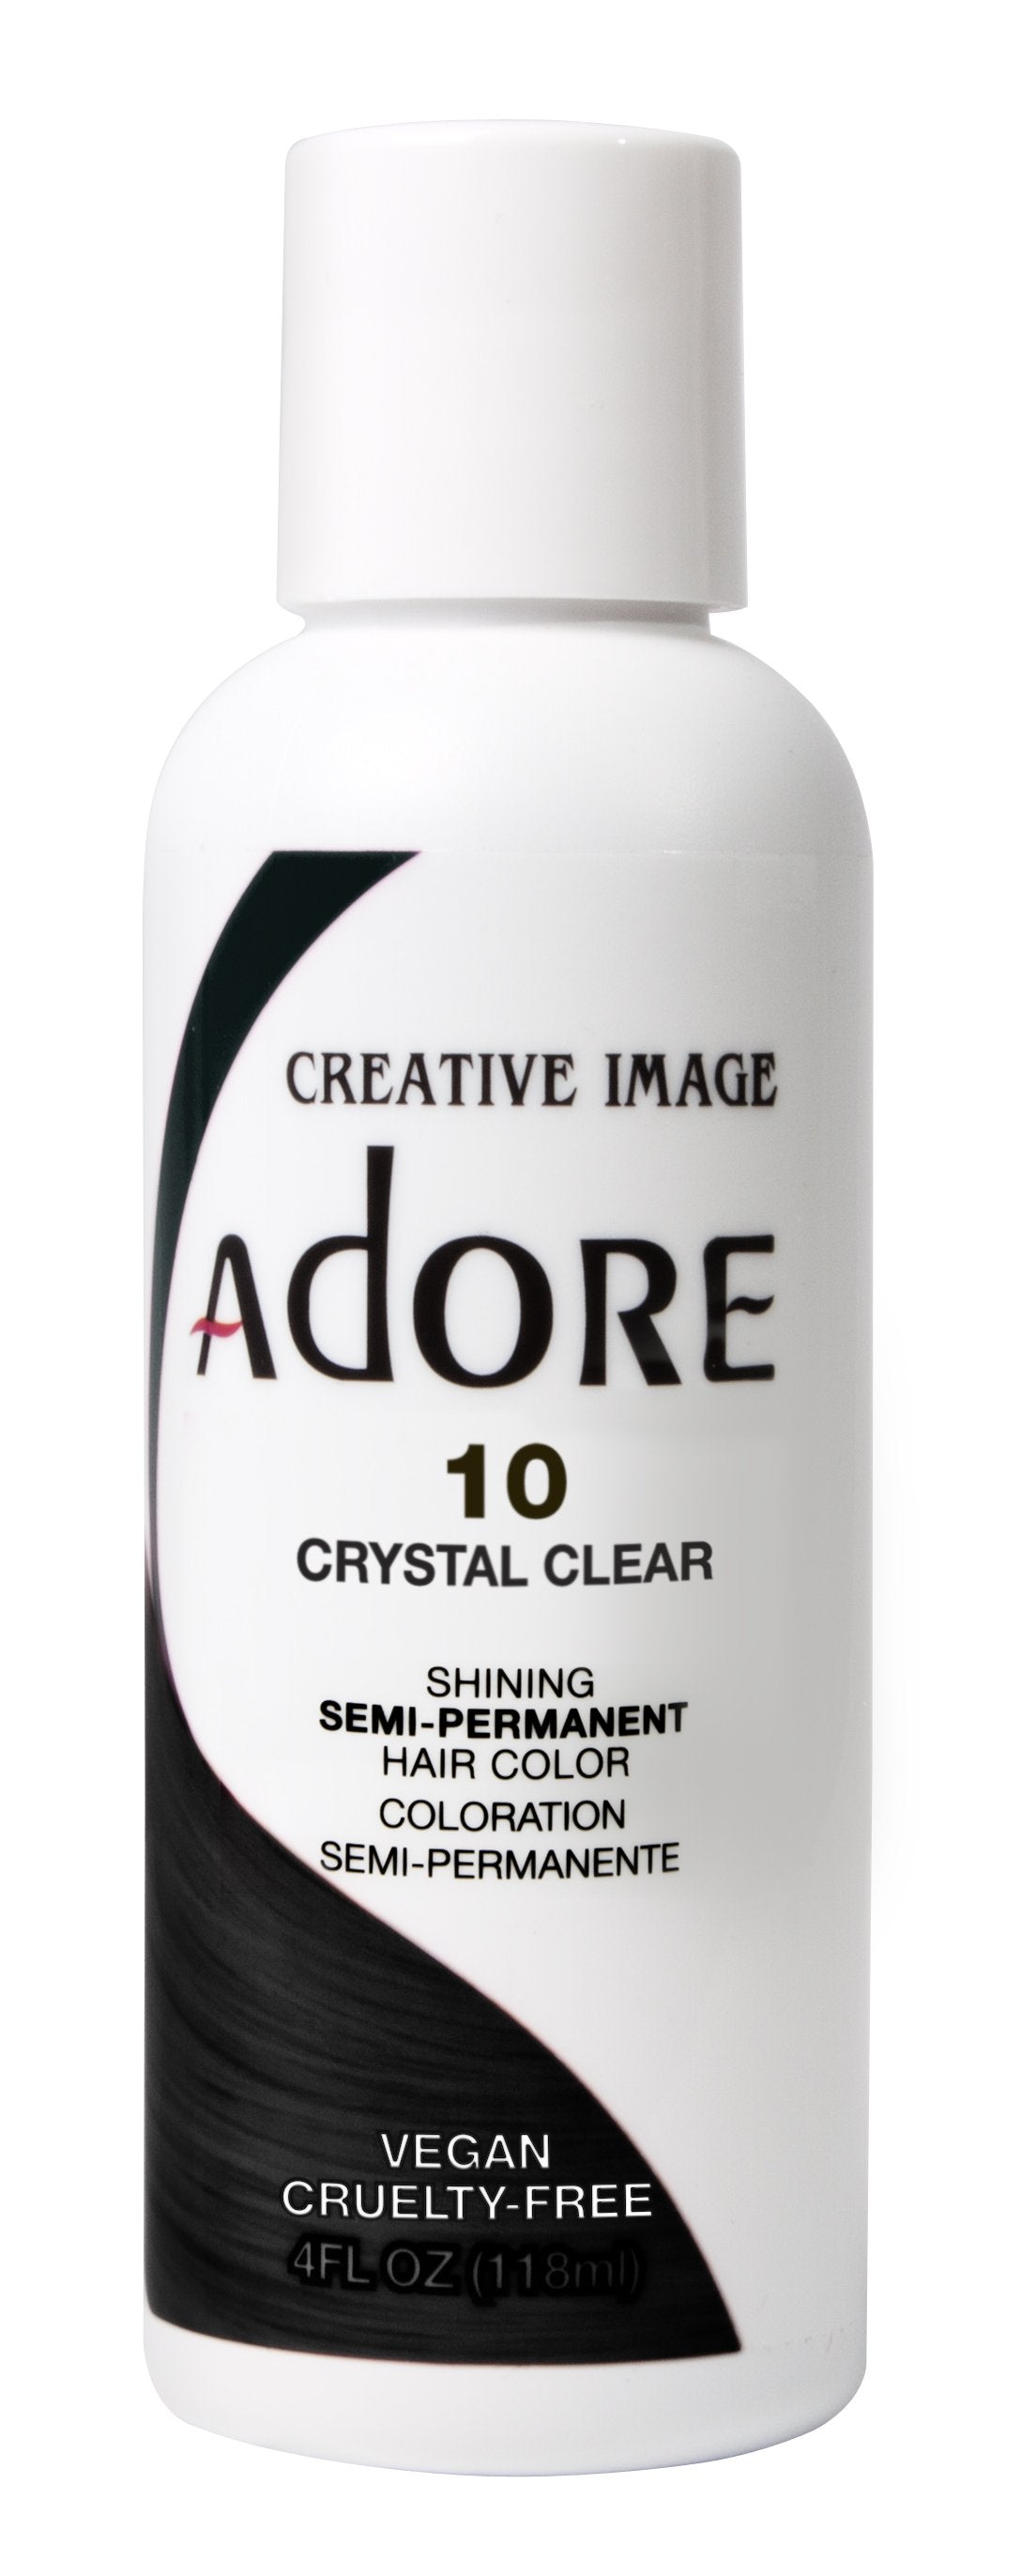 Adore #10 Crystal Clear